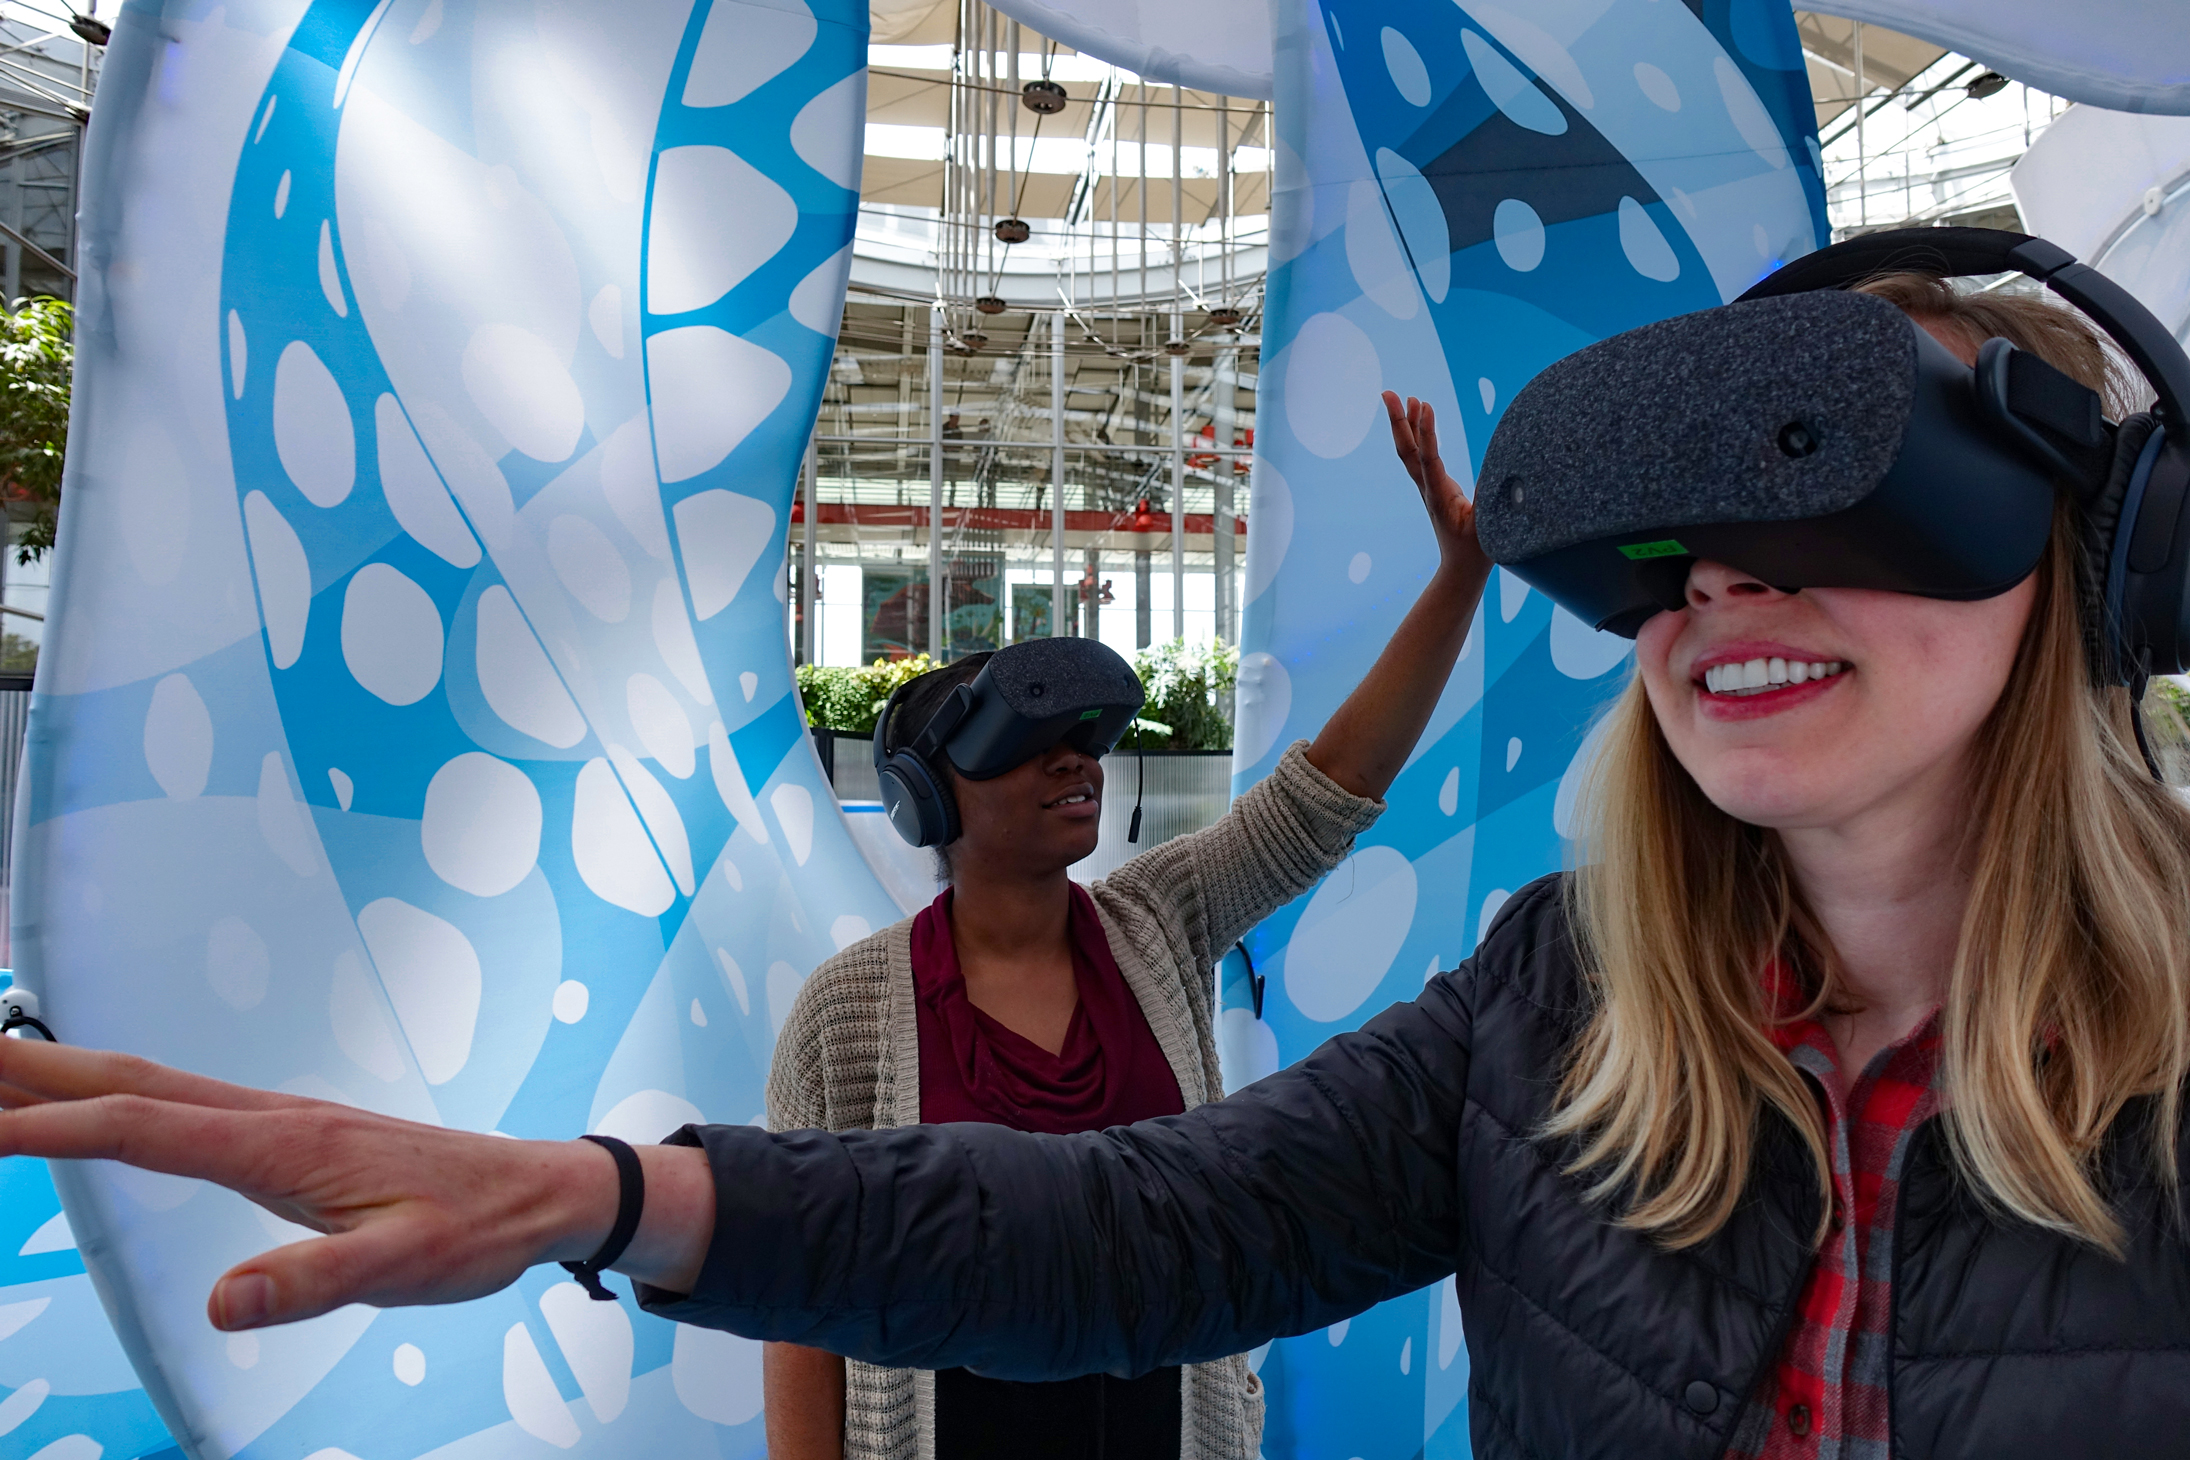 Skyldig dechifrere snave Drop in the Ocean: A Social VR Experience | California Academy of Sciences